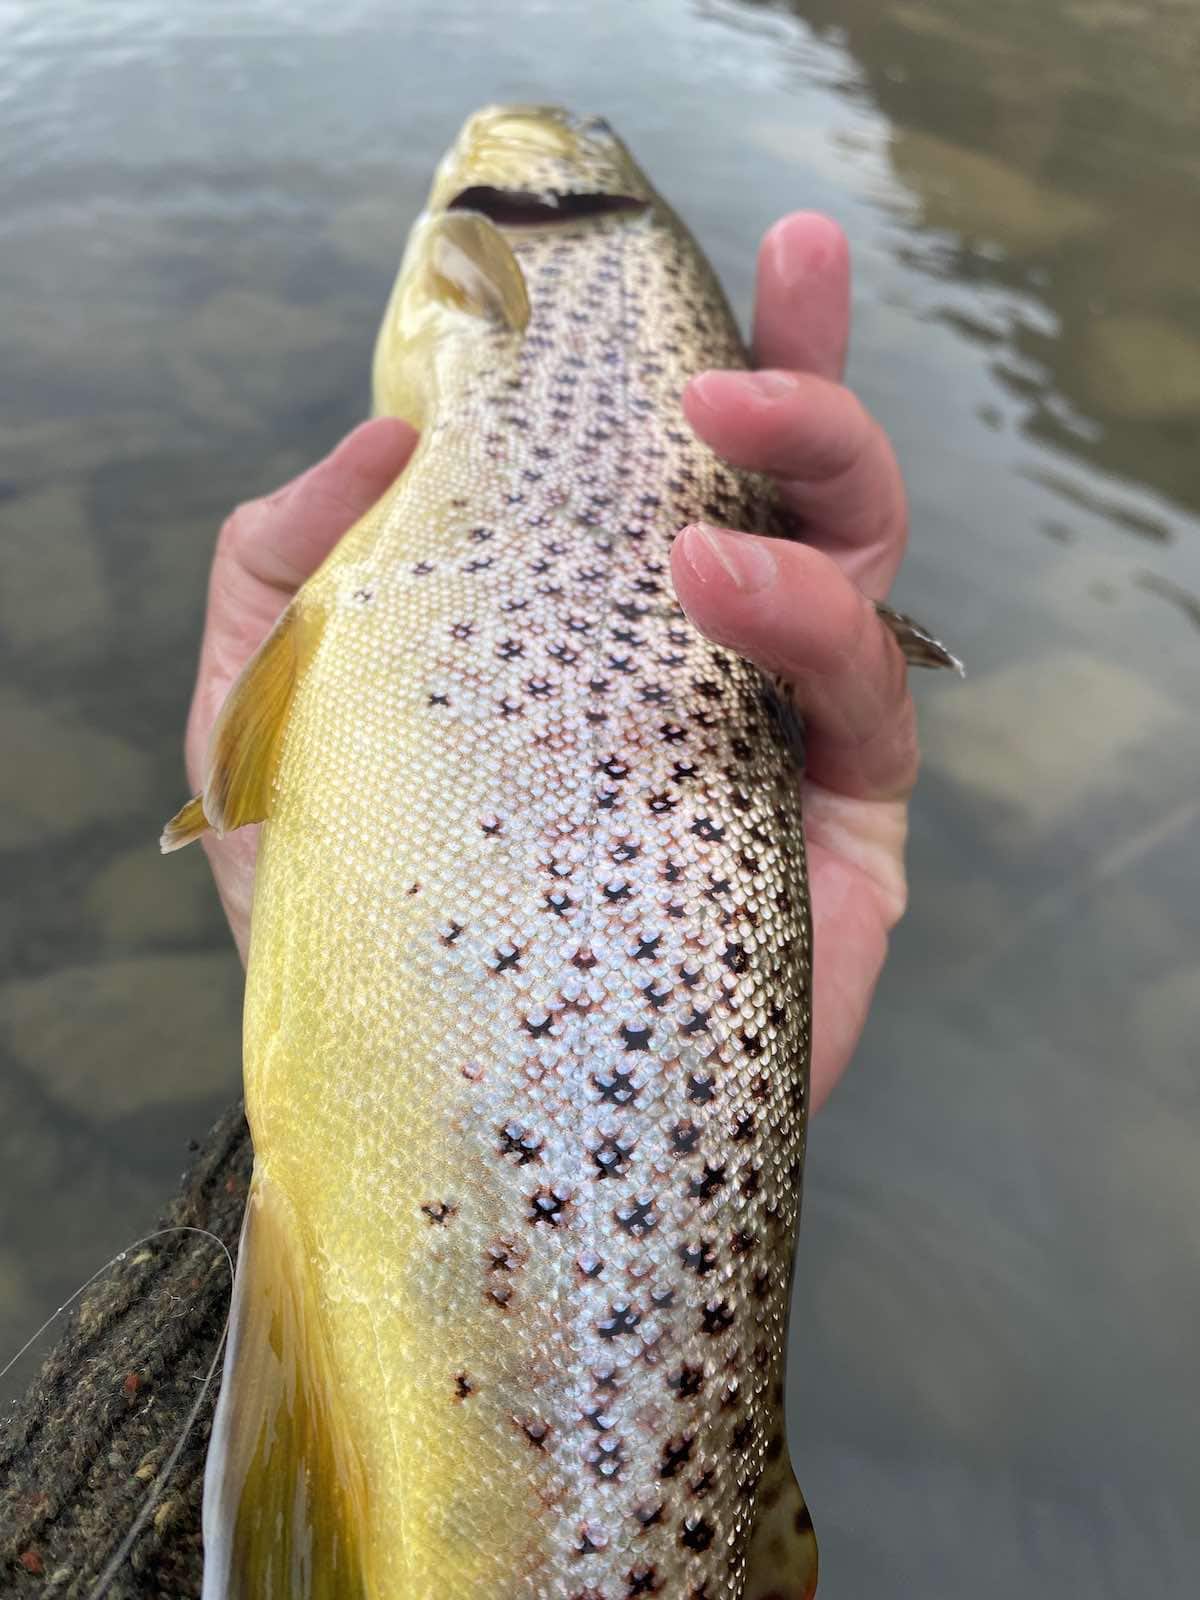 Scales on a large trout